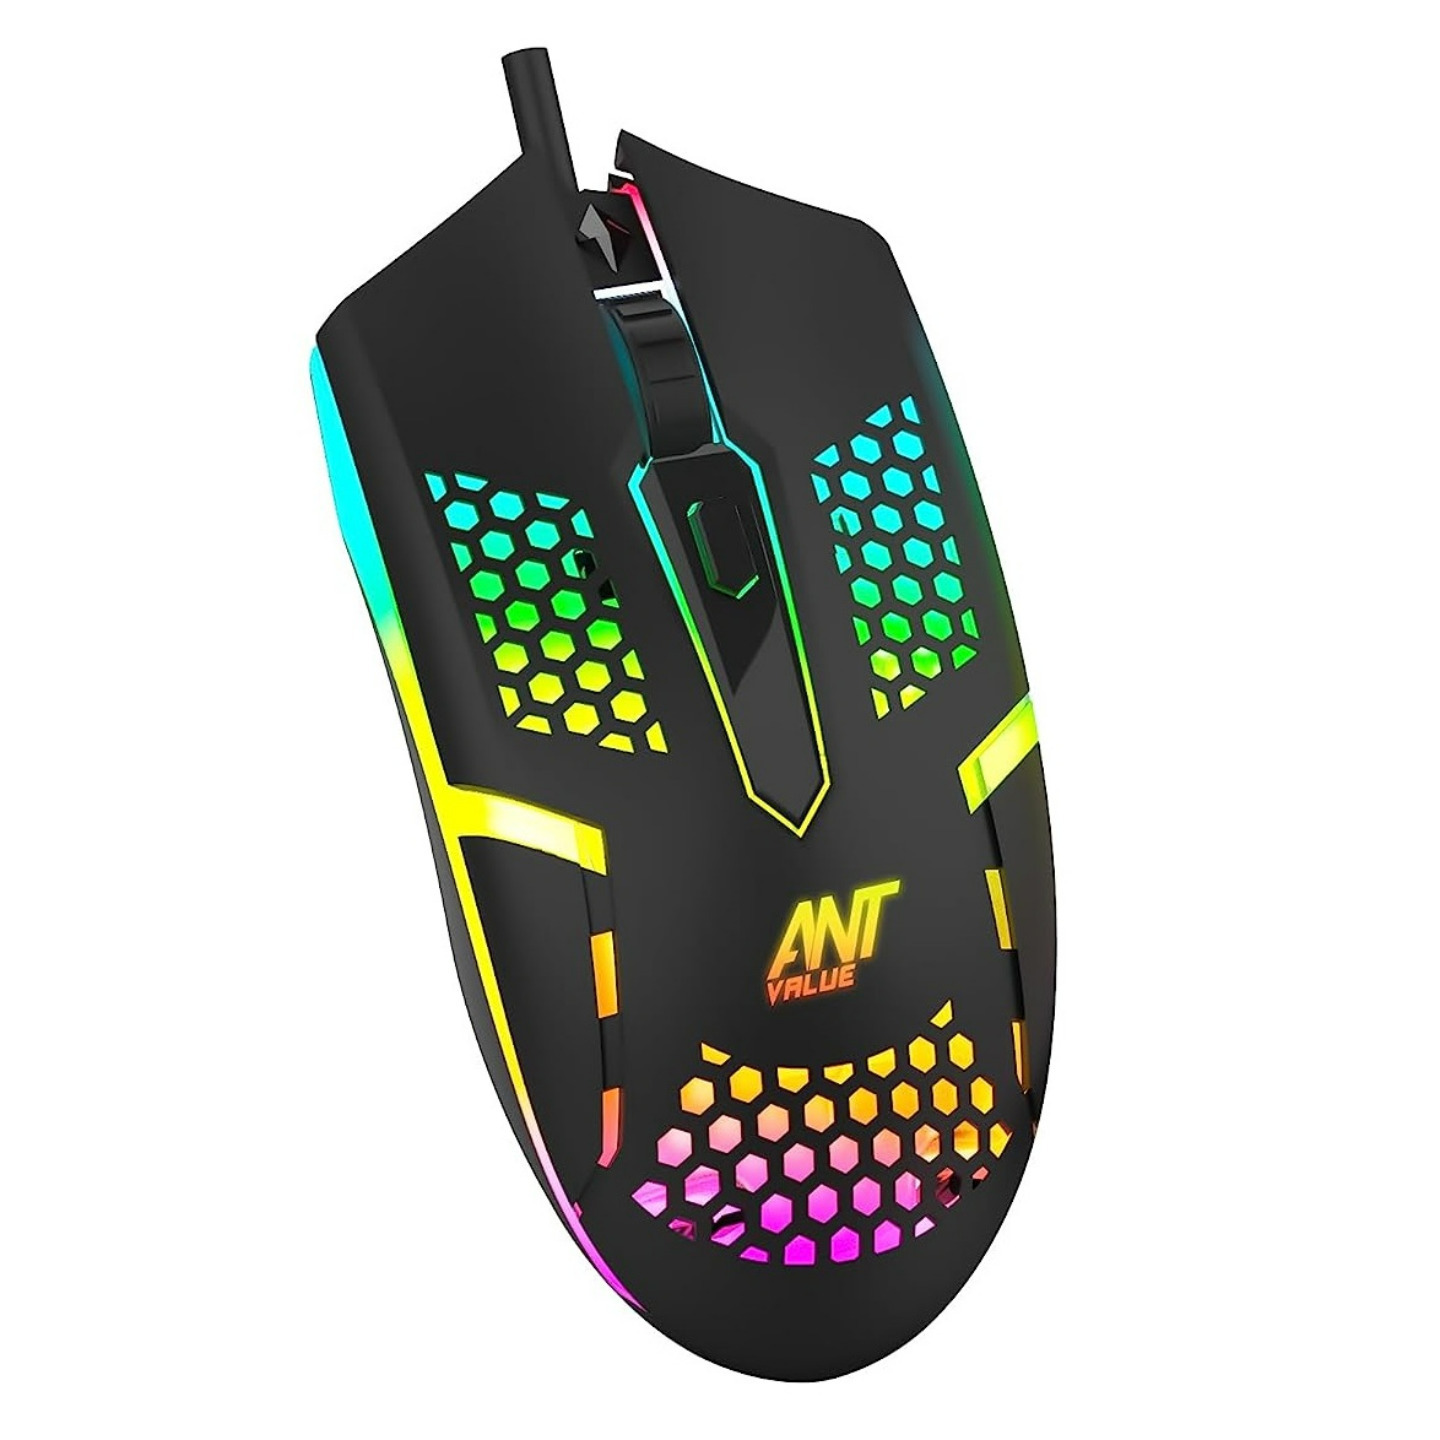 Ant Value GM1103 Gaming Mouse with RGB Backlit and 4 Adjustable DPI